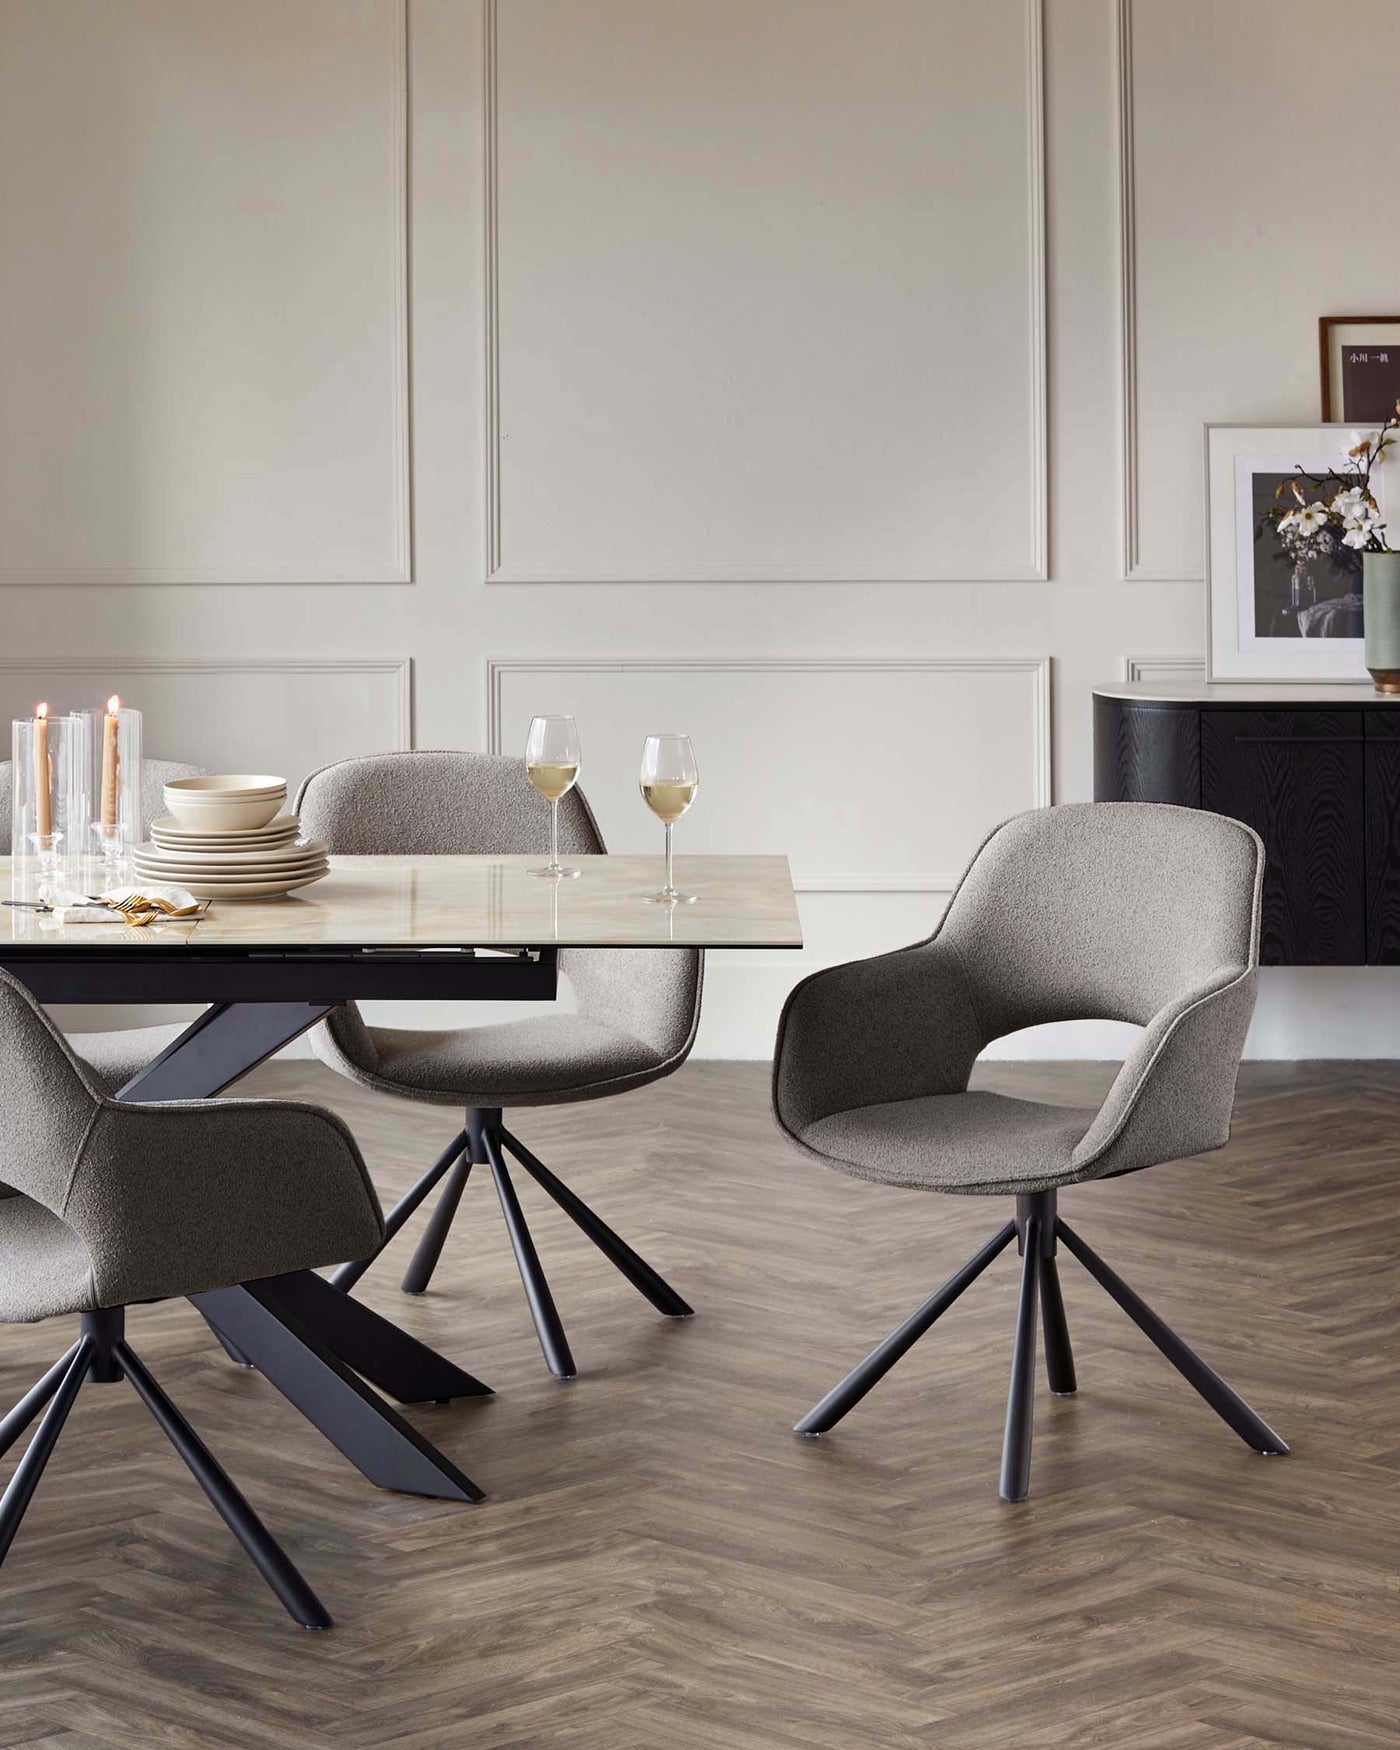 Modern dining room furniture featuring a rectangular table with a light marble top and angular black metal legs, paired with four upholstered mid-century modern-inspired chairs with curved backs and black metal base.